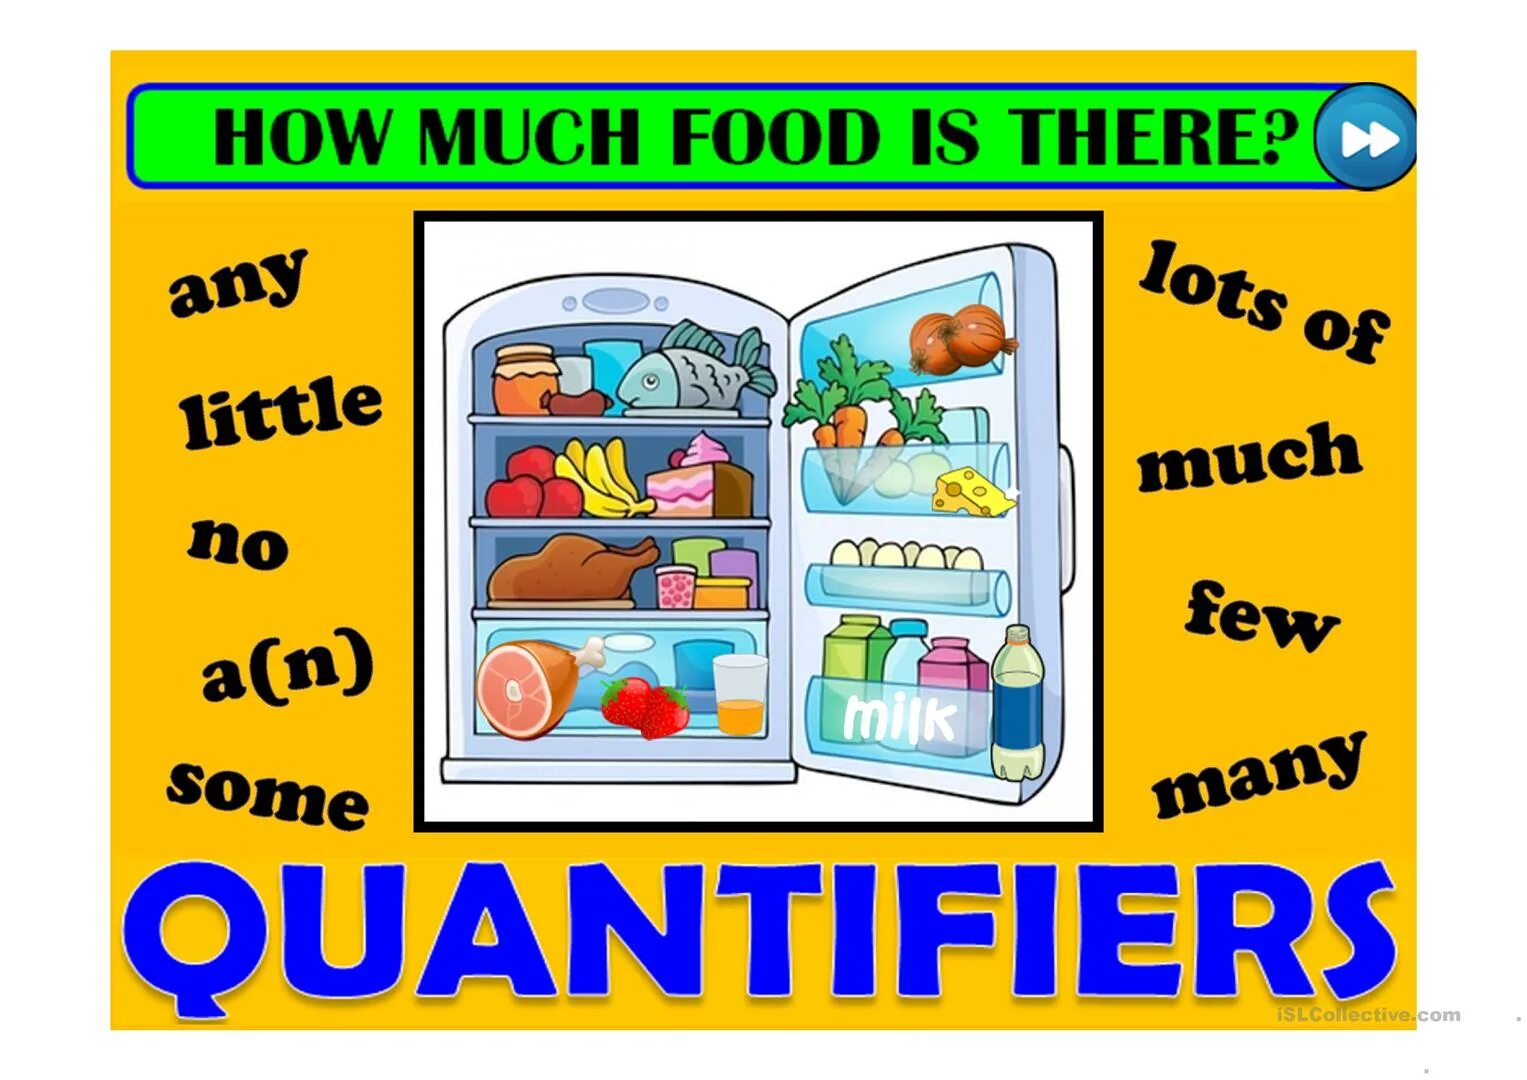 Much many тема food. How many how much игра. Игра quantifiers. Much many картинки. Quite a few